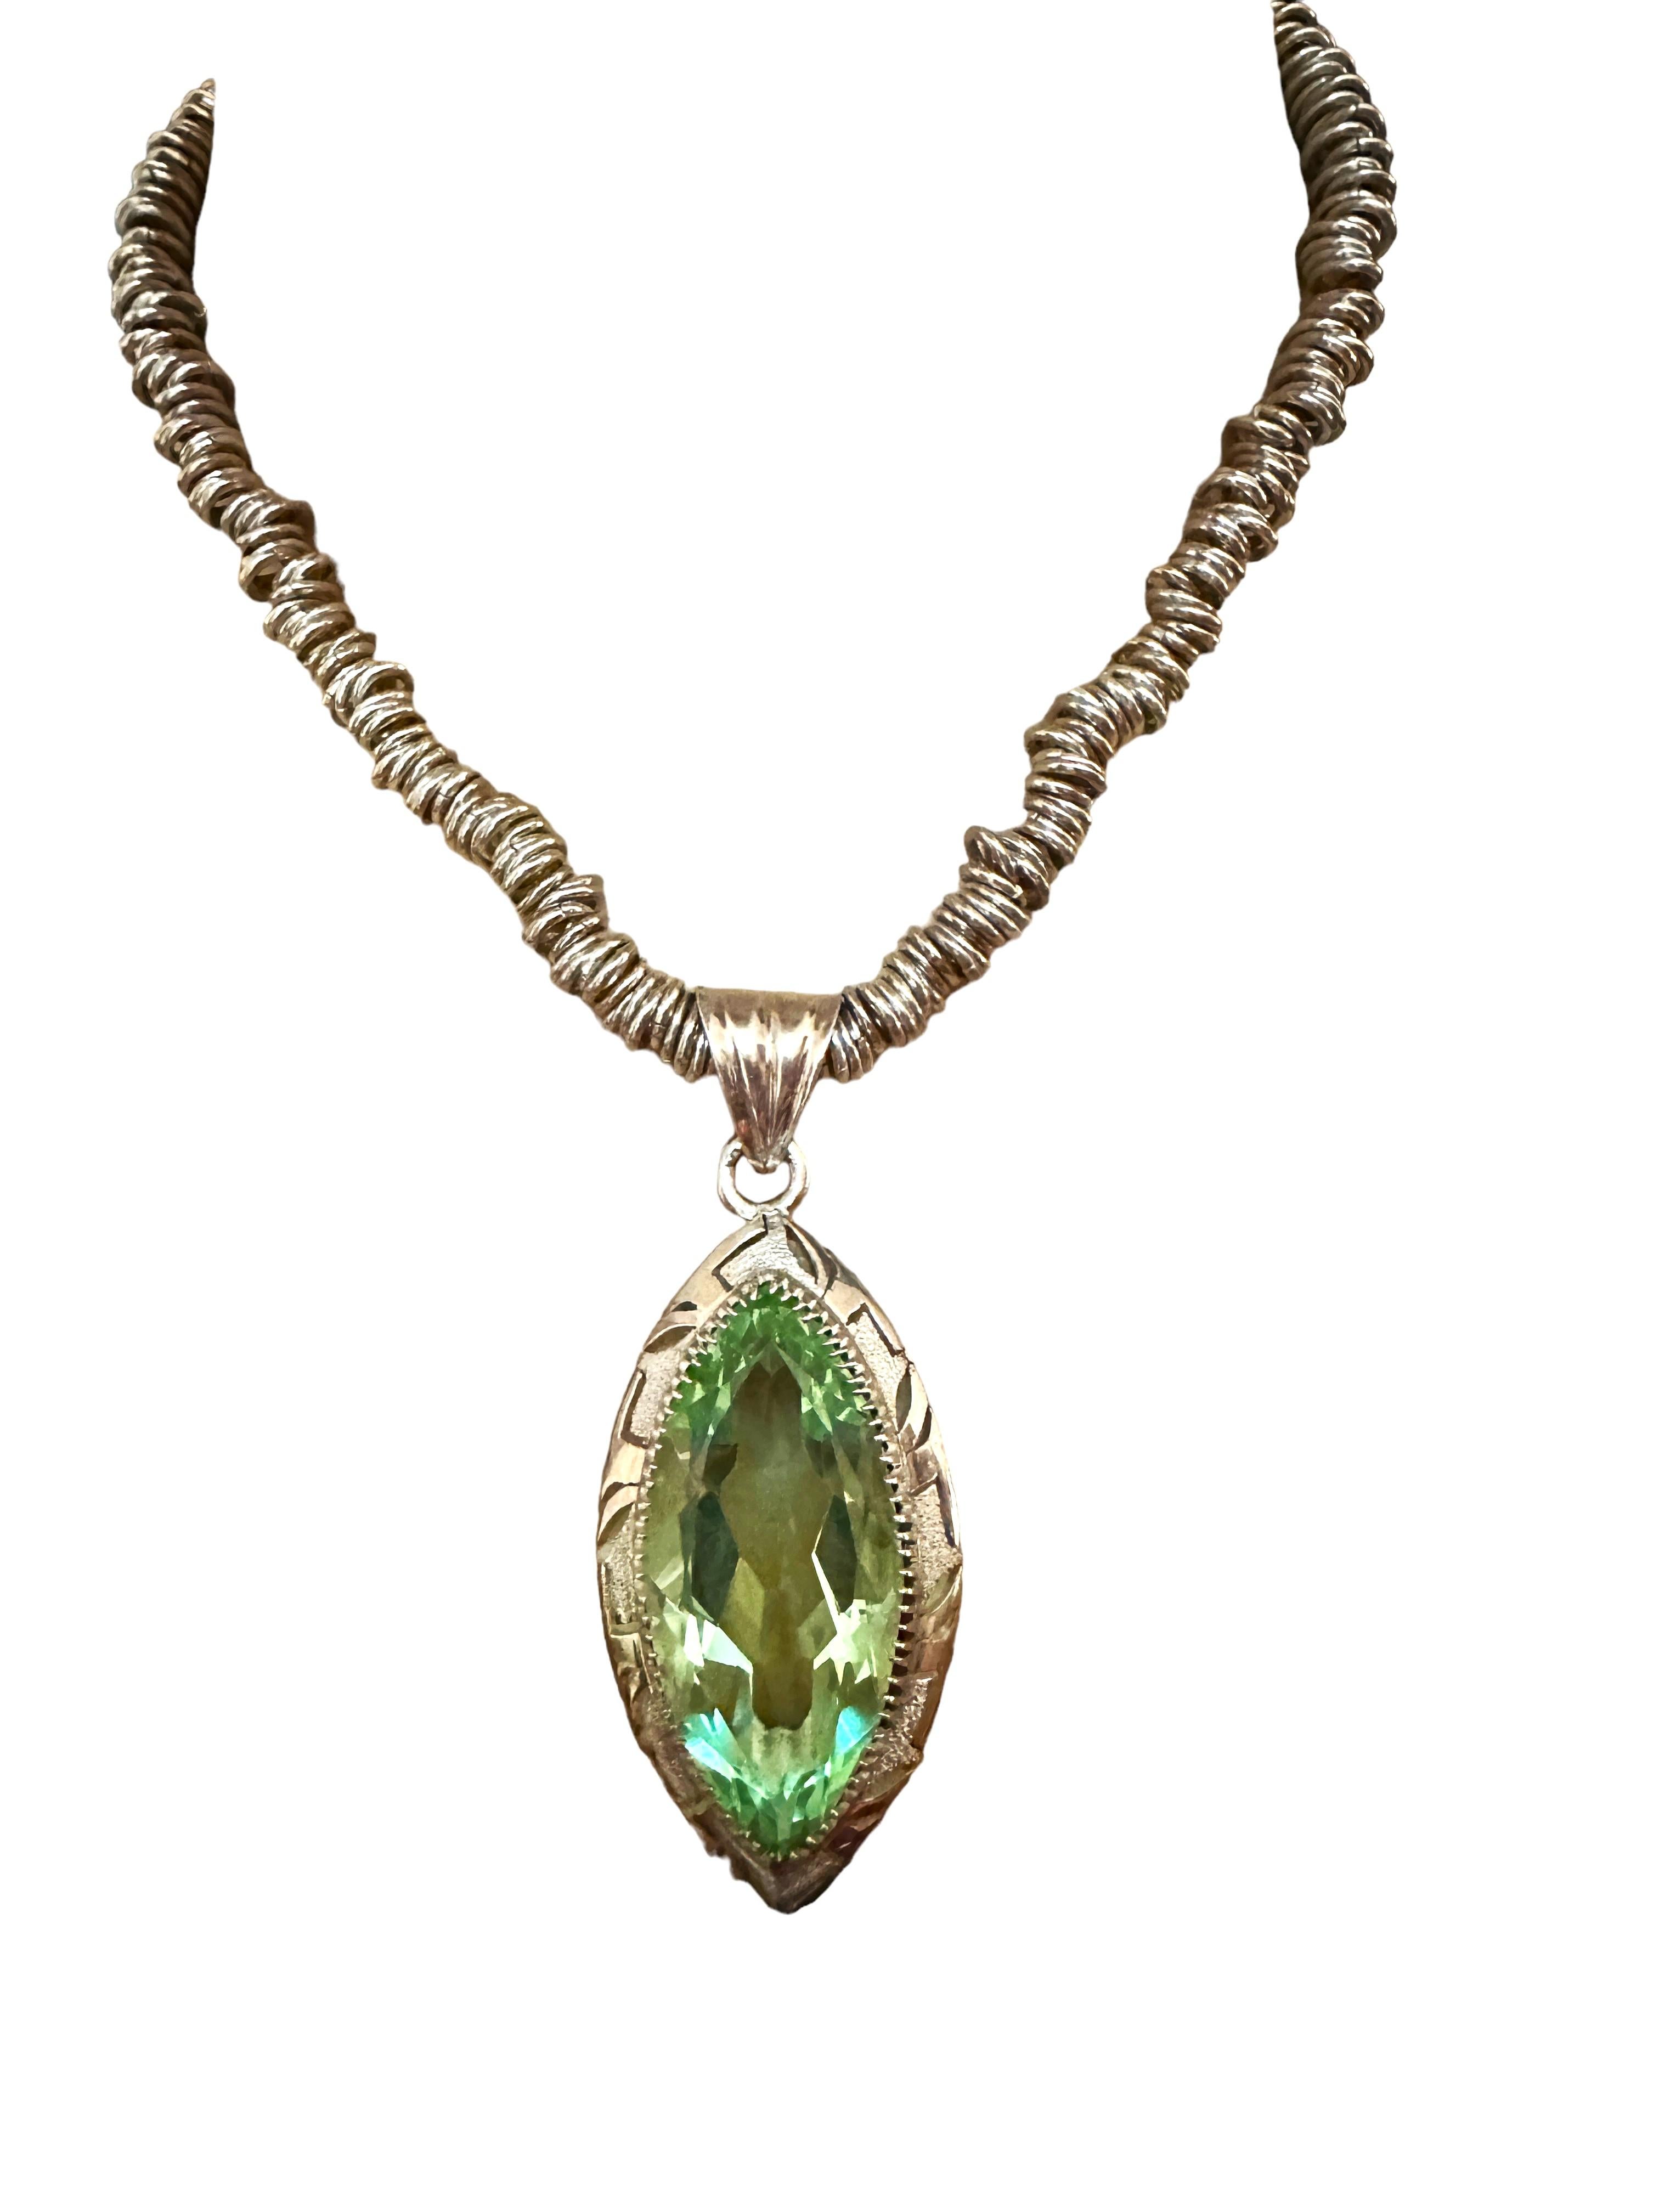 Handmade 16 Inch Ornate Sterling Silver Pendant Necklace with Green Quartz For Sale 4